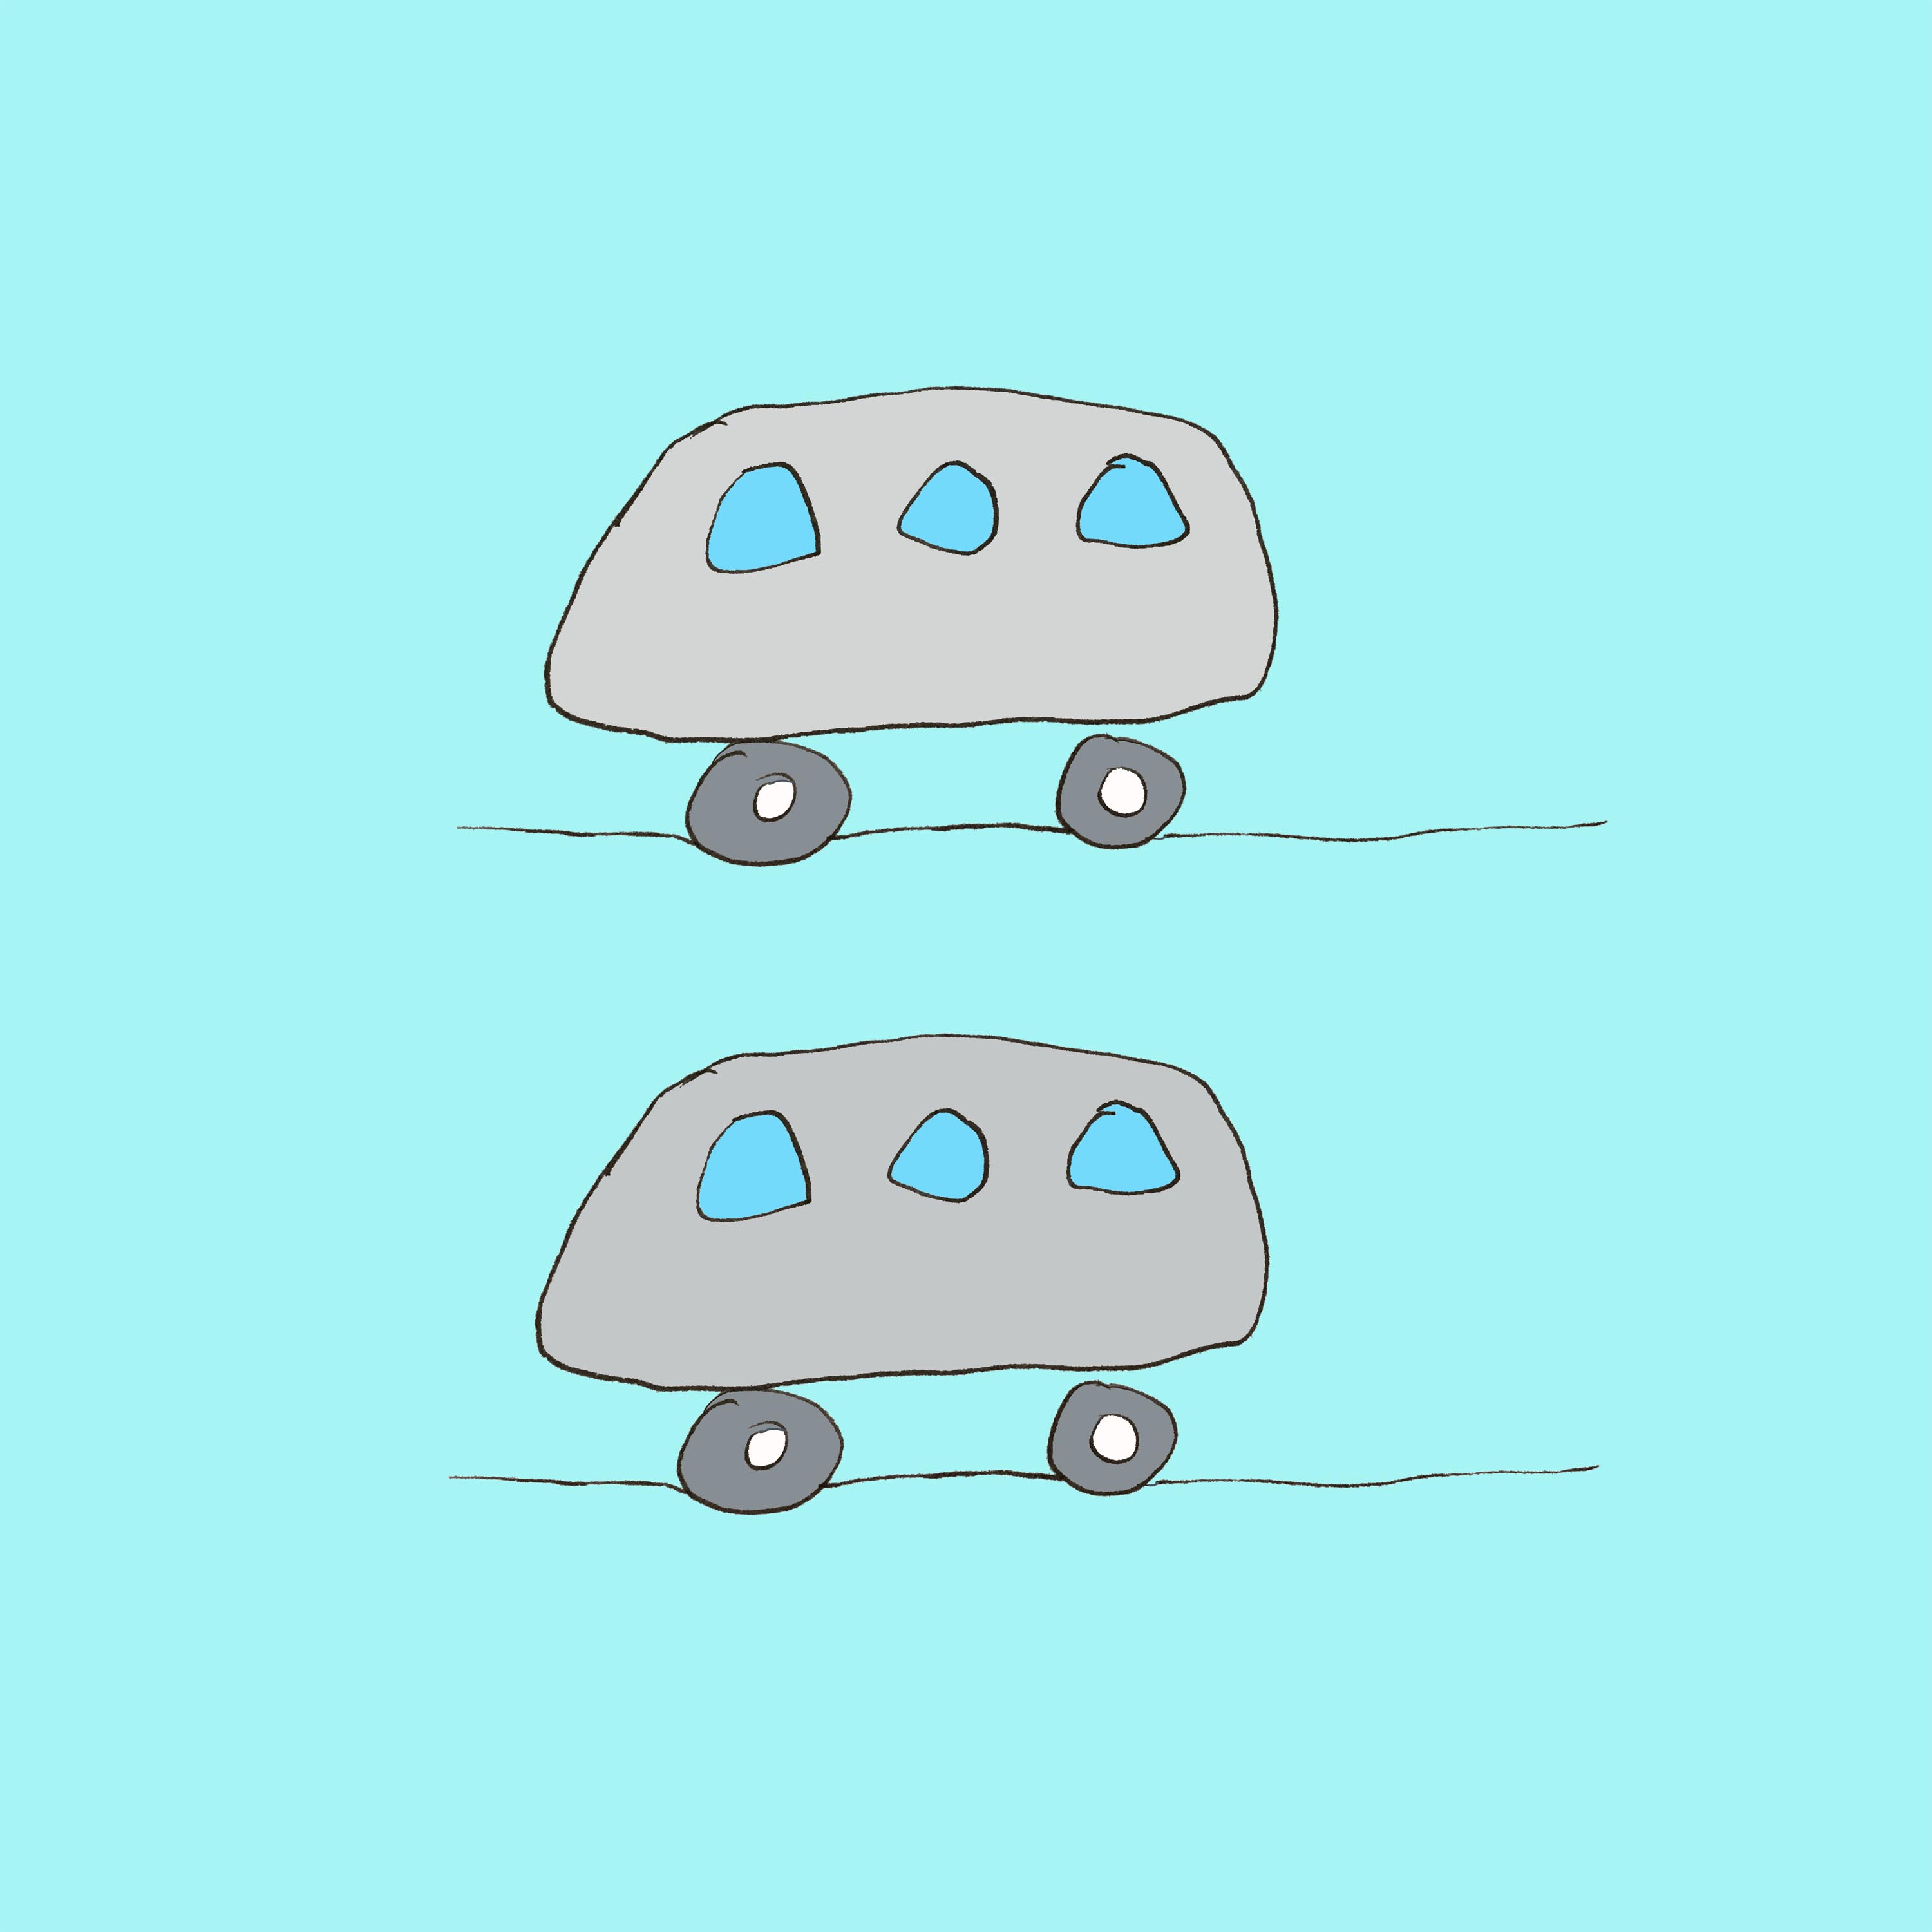 art every day number 181 the driverless car illustration drawing